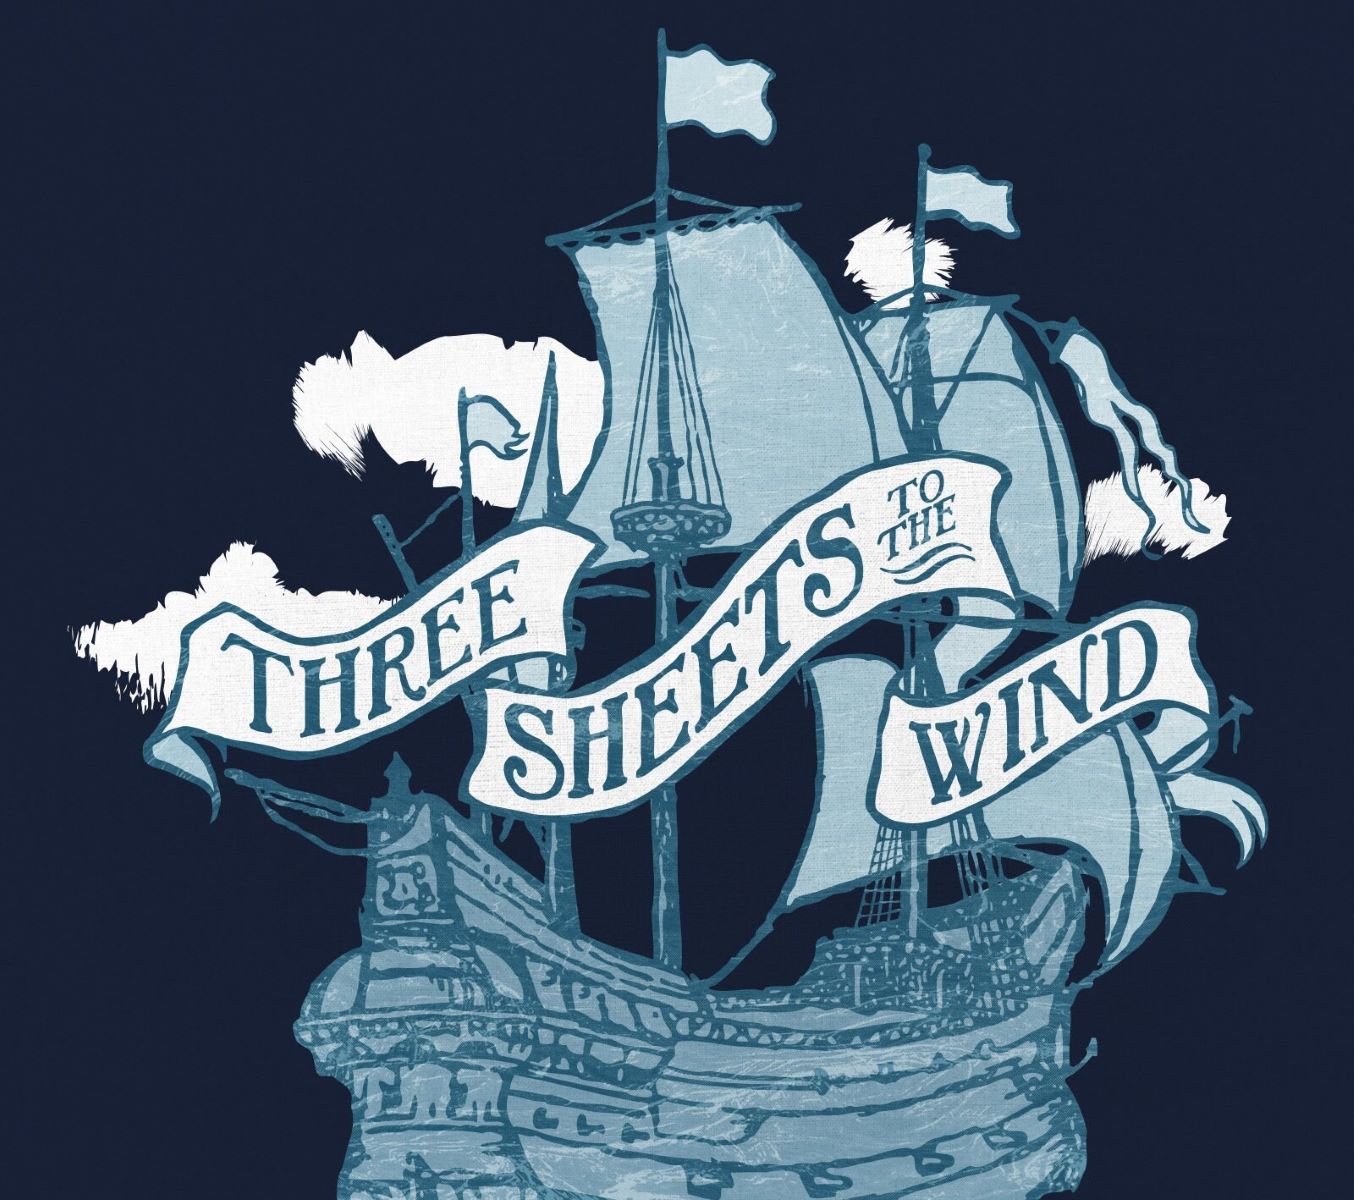 The Origins And Meaning Of “Three Sheets To The Wind”